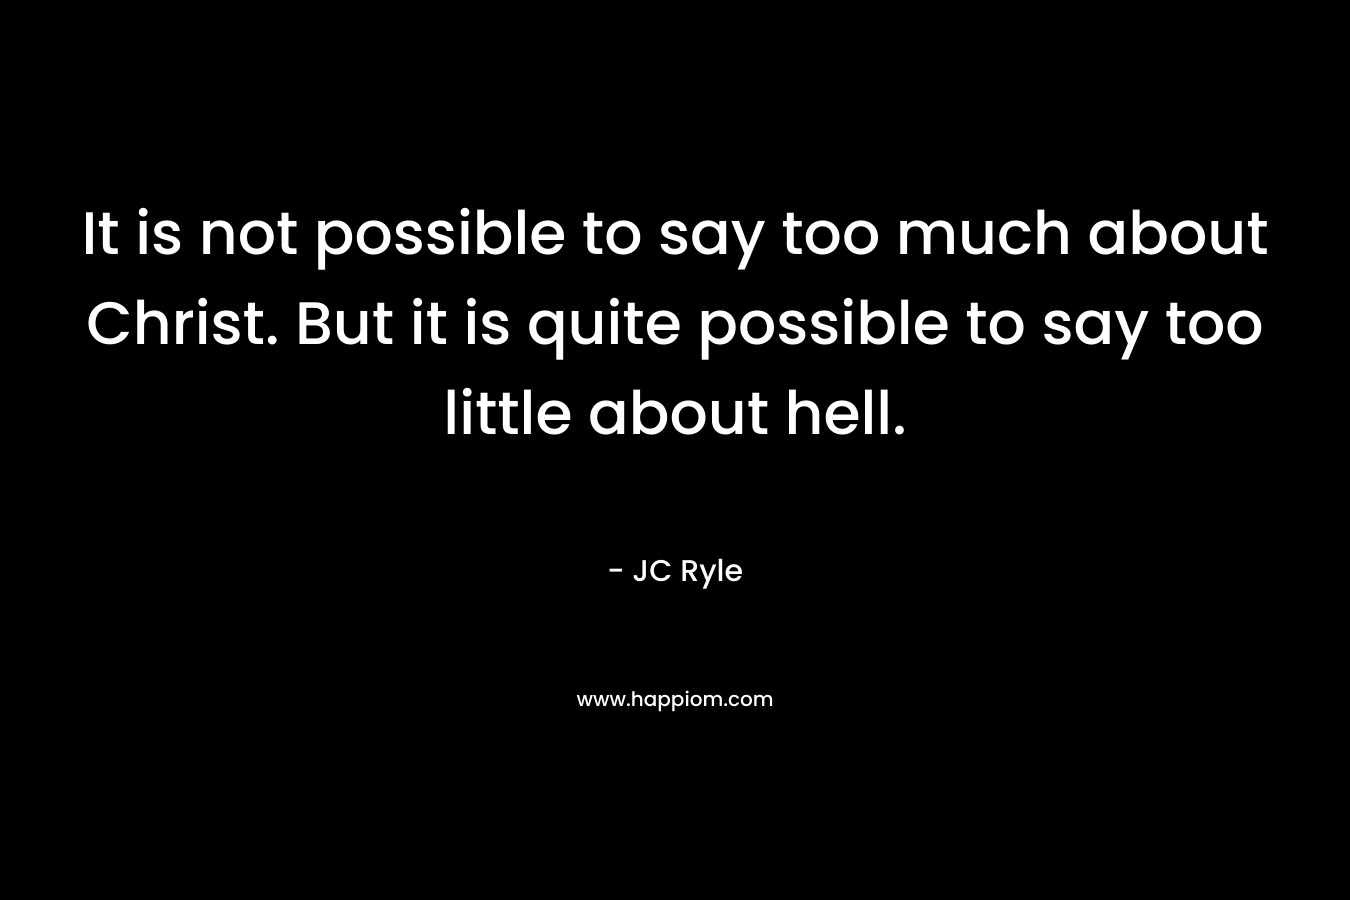 It is not possible to say too much about Christ. But it is quite possible to say too little about hell. – JC Ryle